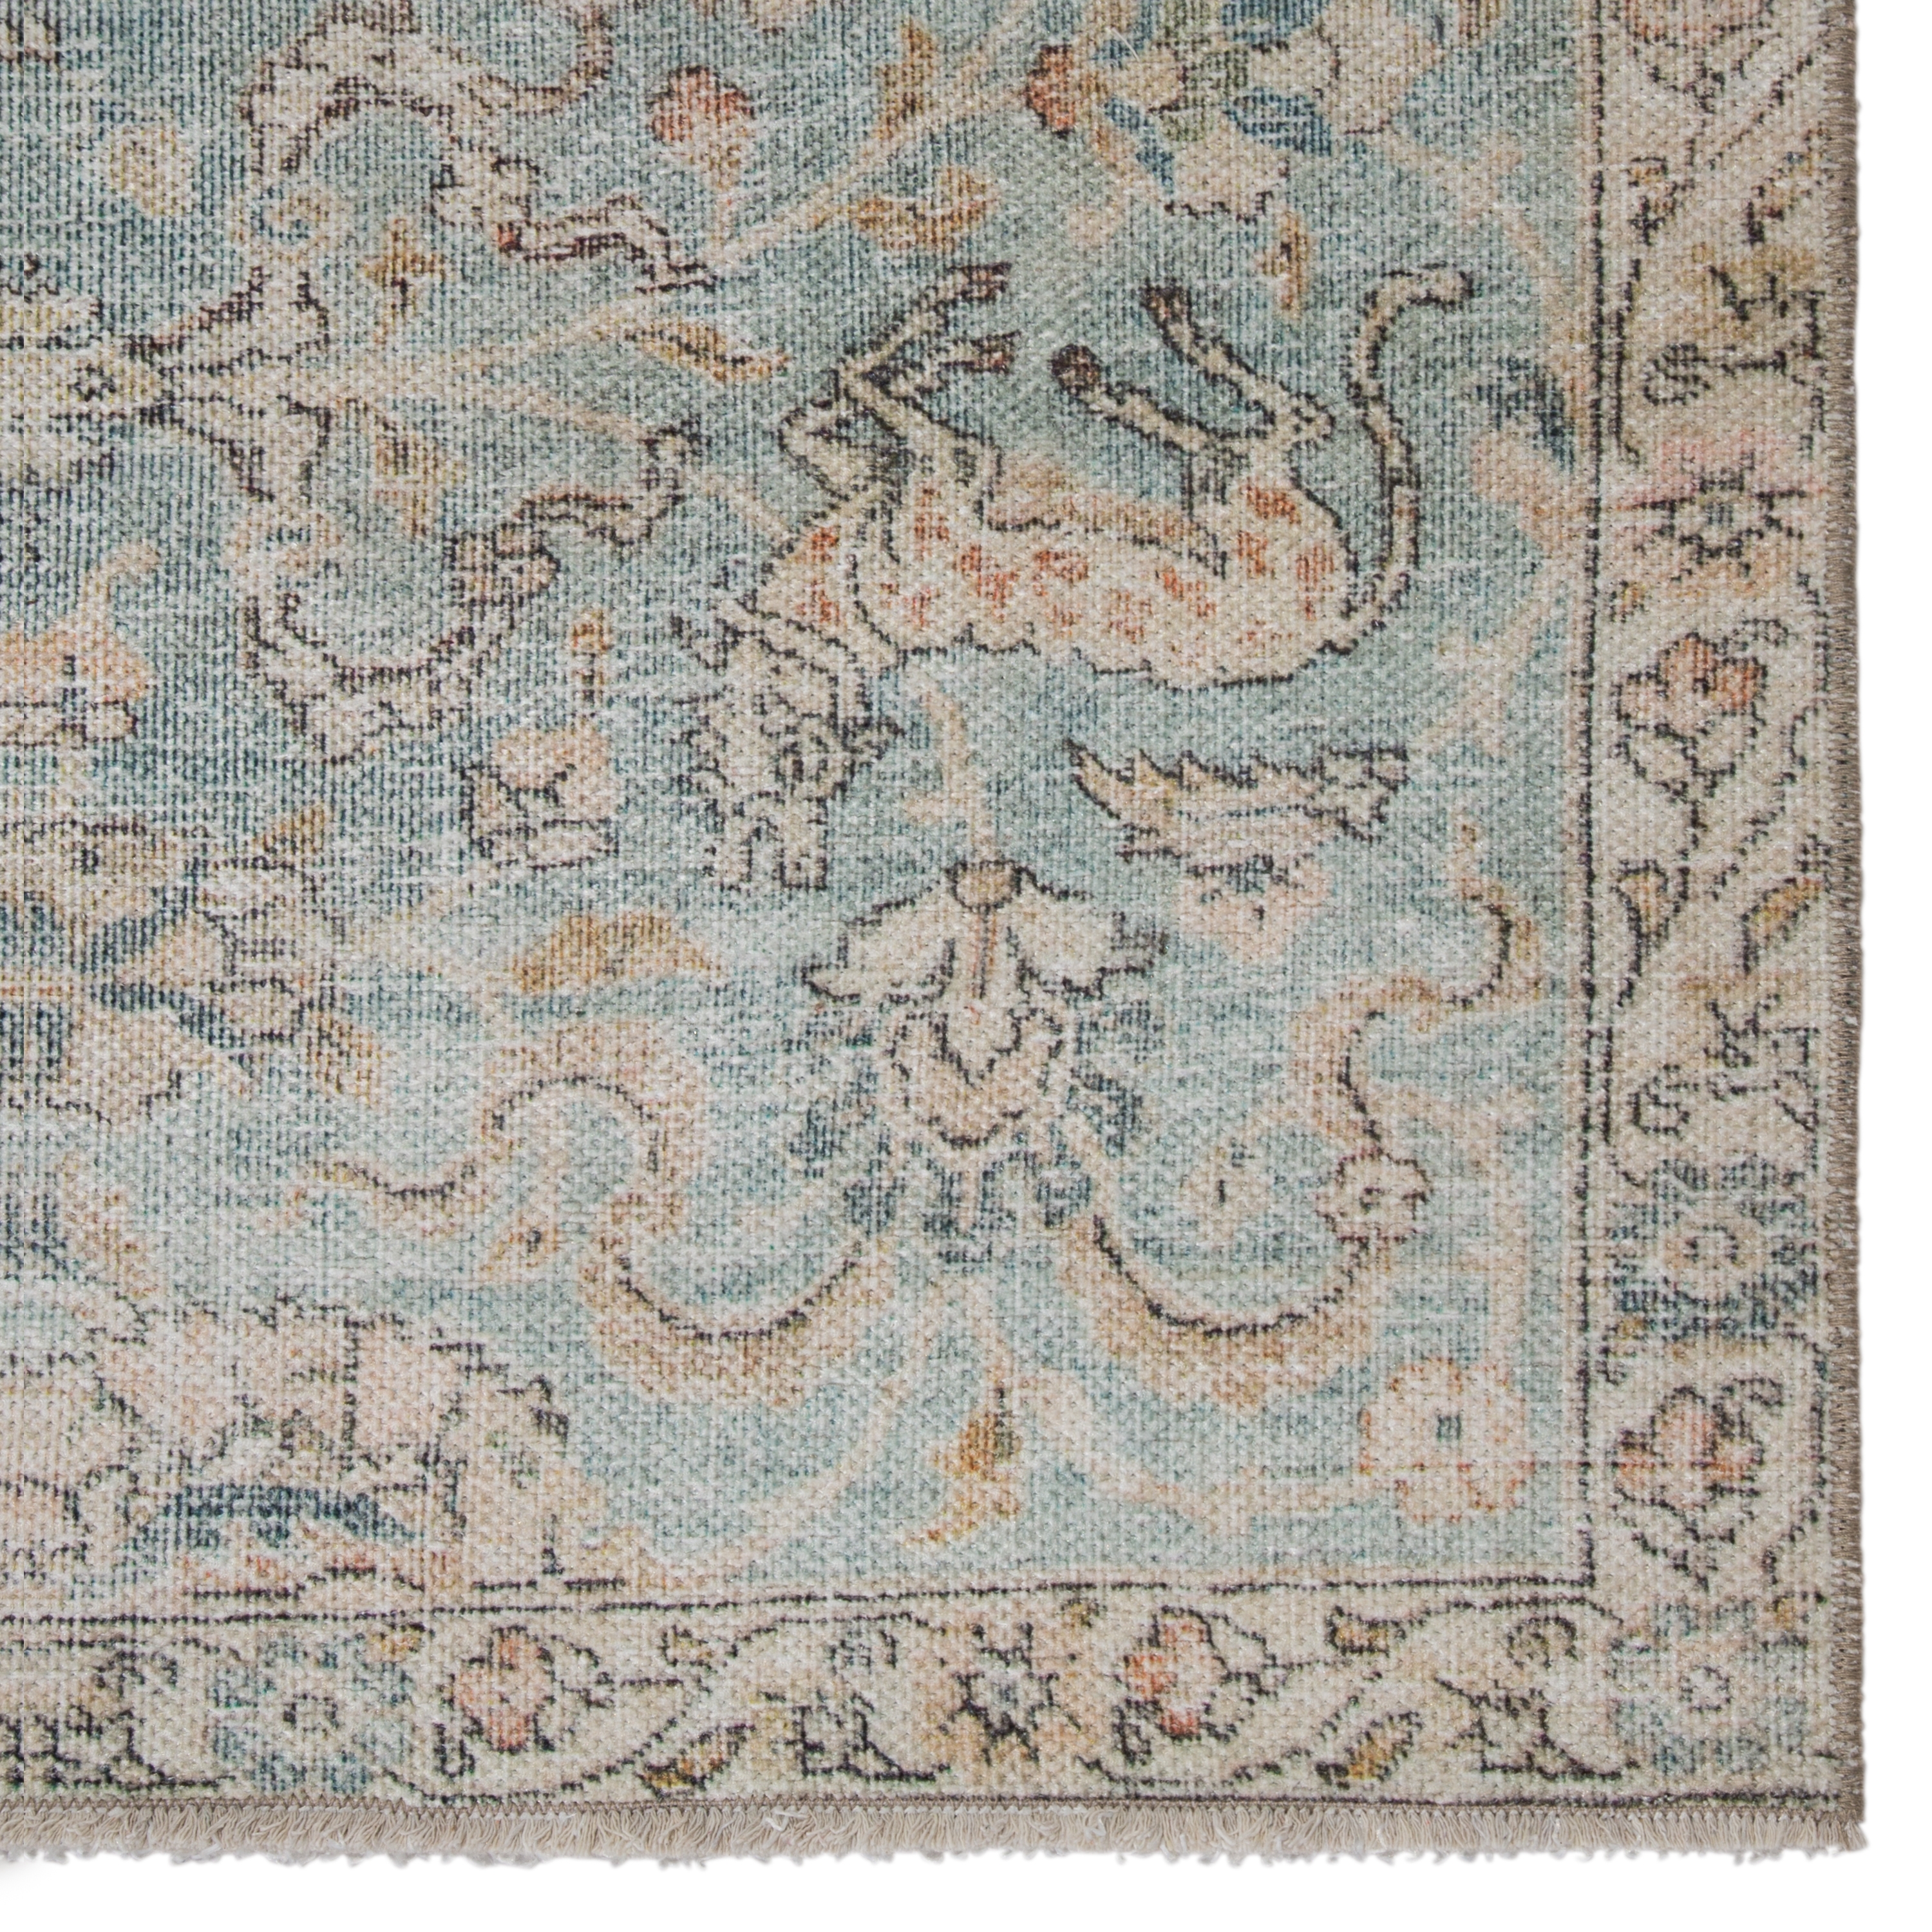 Stag Oriental Teal/ Gold Area Rug (8'10"X11'9") - Image 3